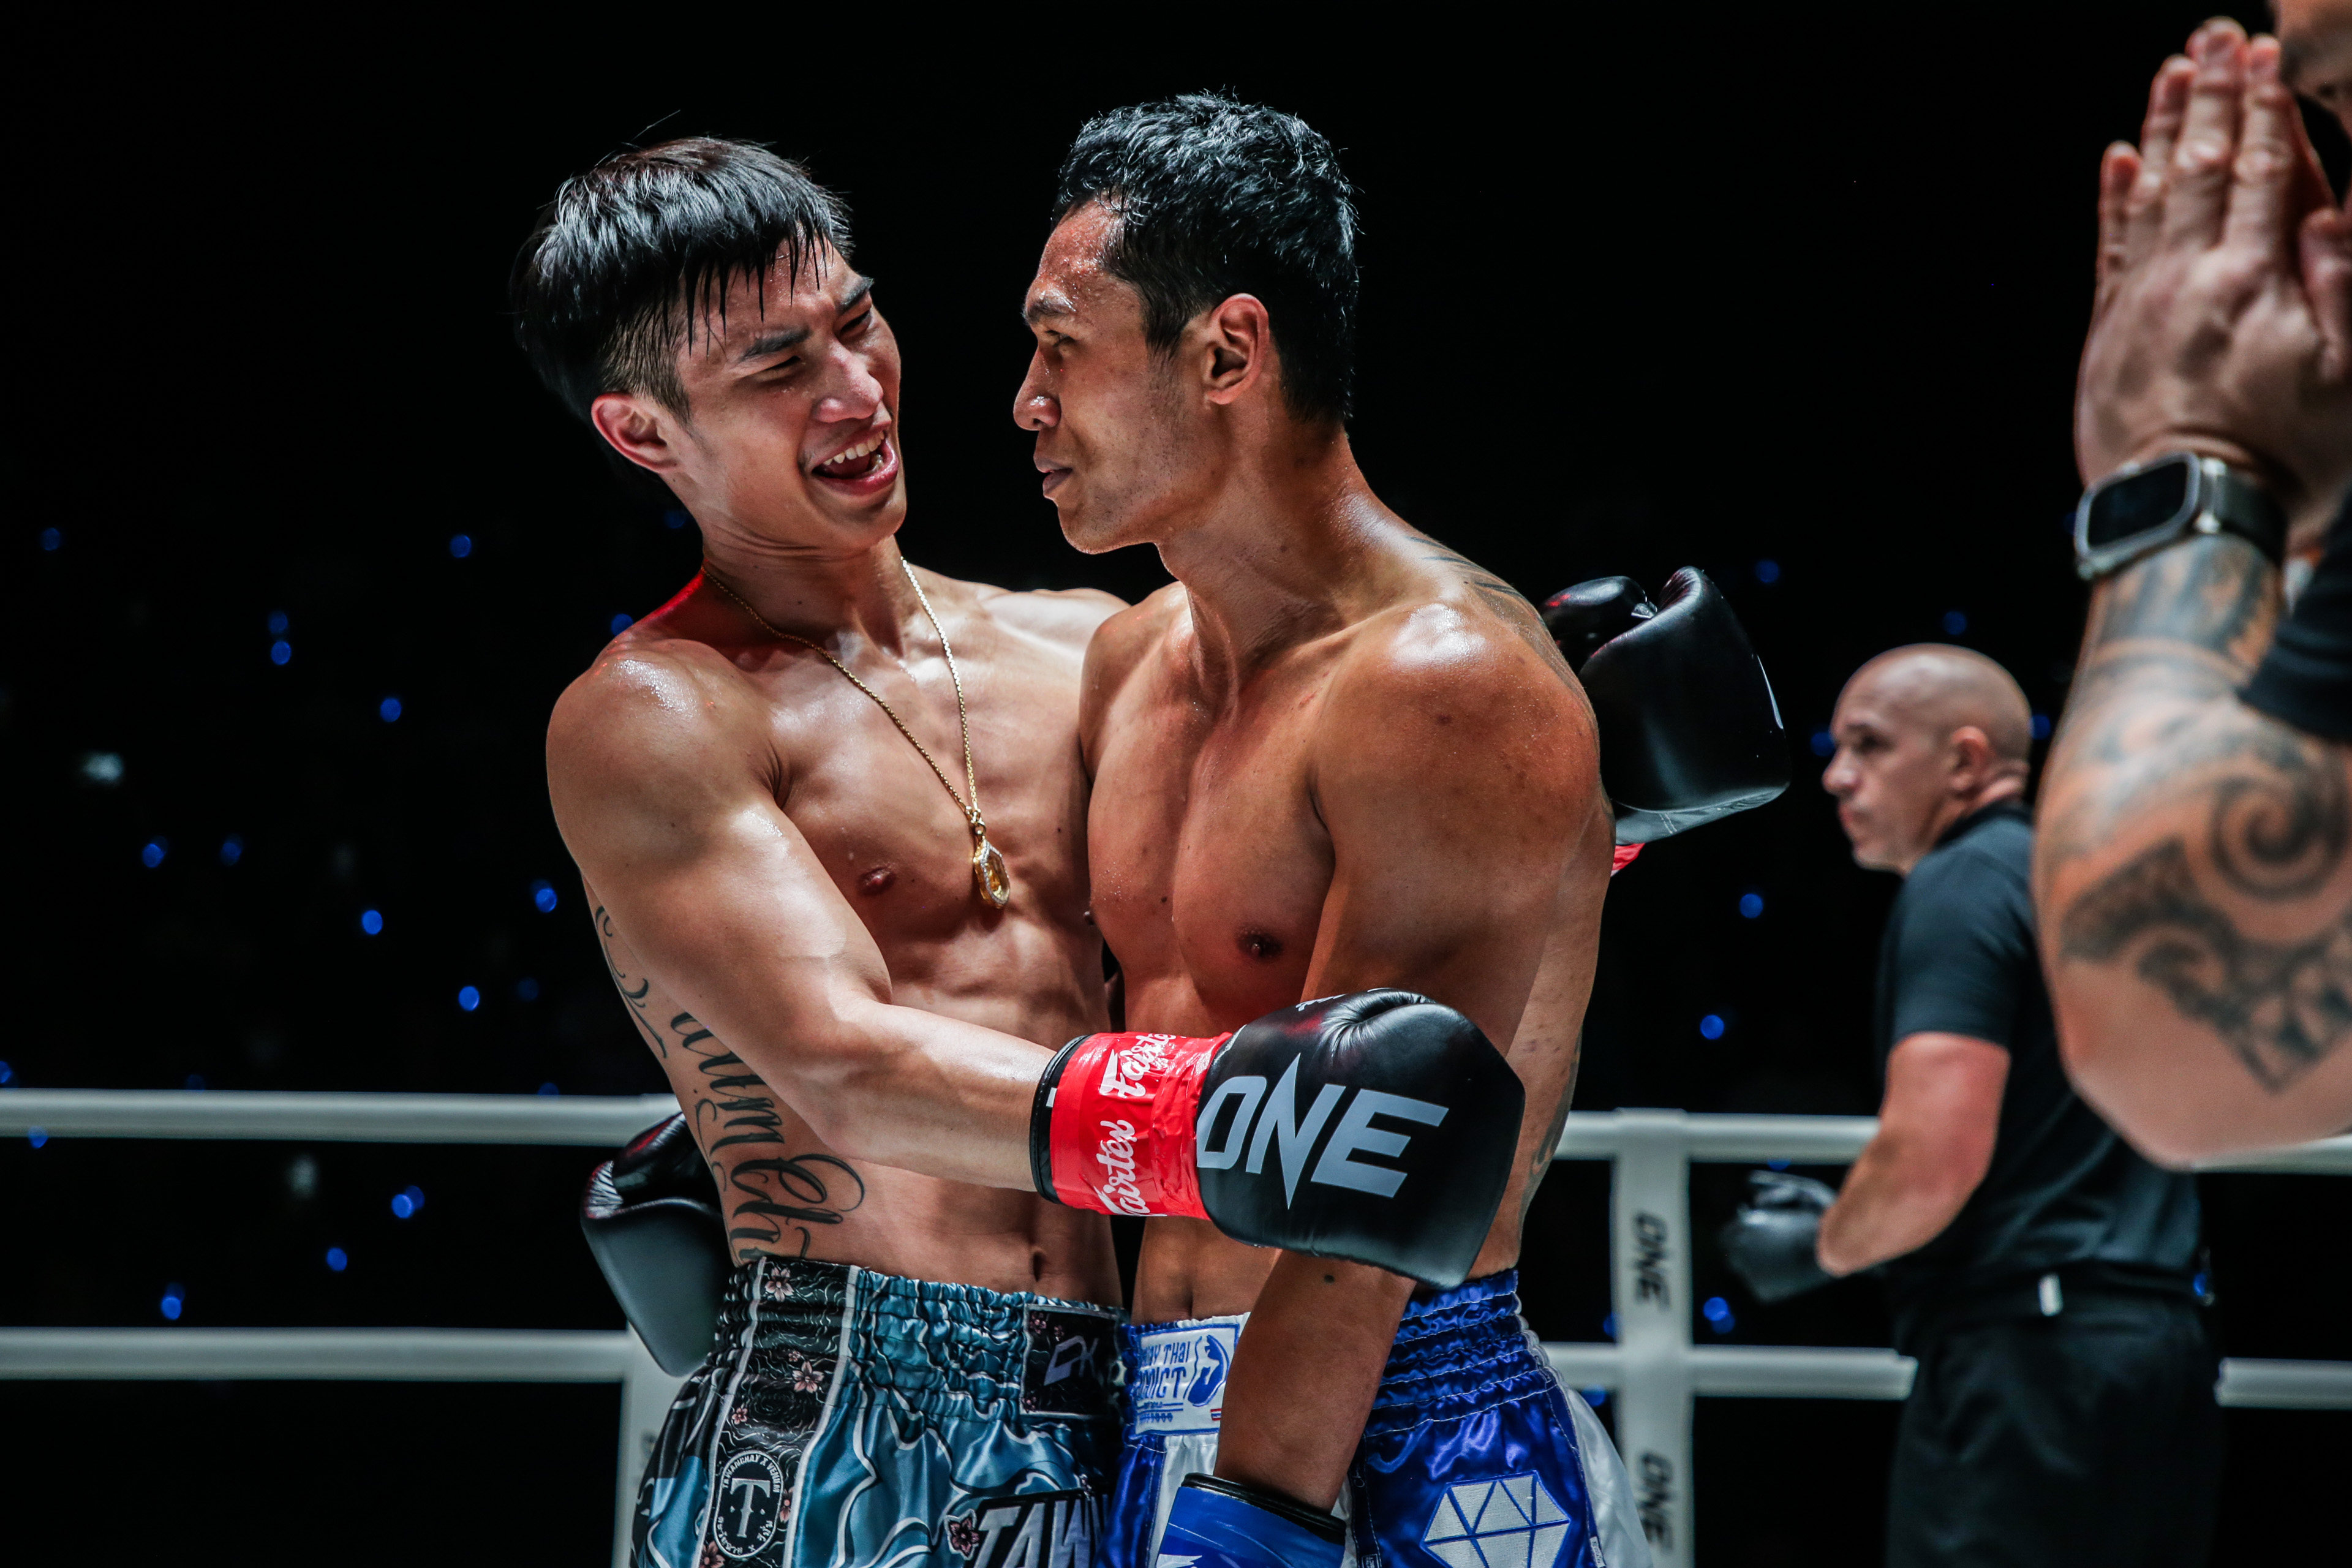 Tawanchai embraces Jo Nattawaut after their kickboxing match at ONE Fight Night 15. Photos: ONE Championship